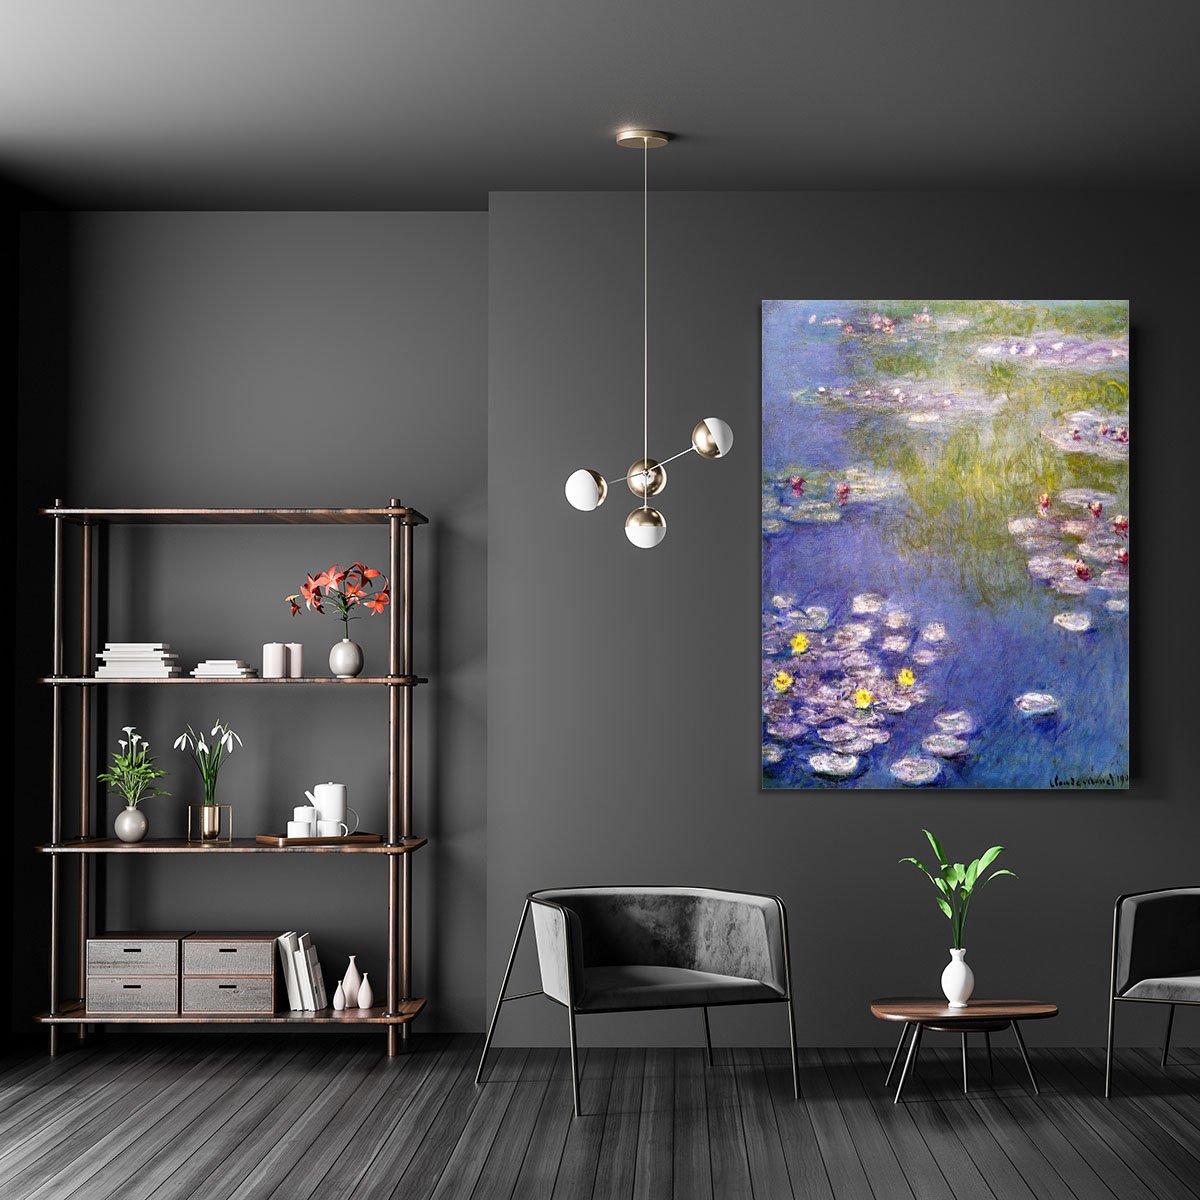 Nympheas at Giverny Canvas Print or Poster